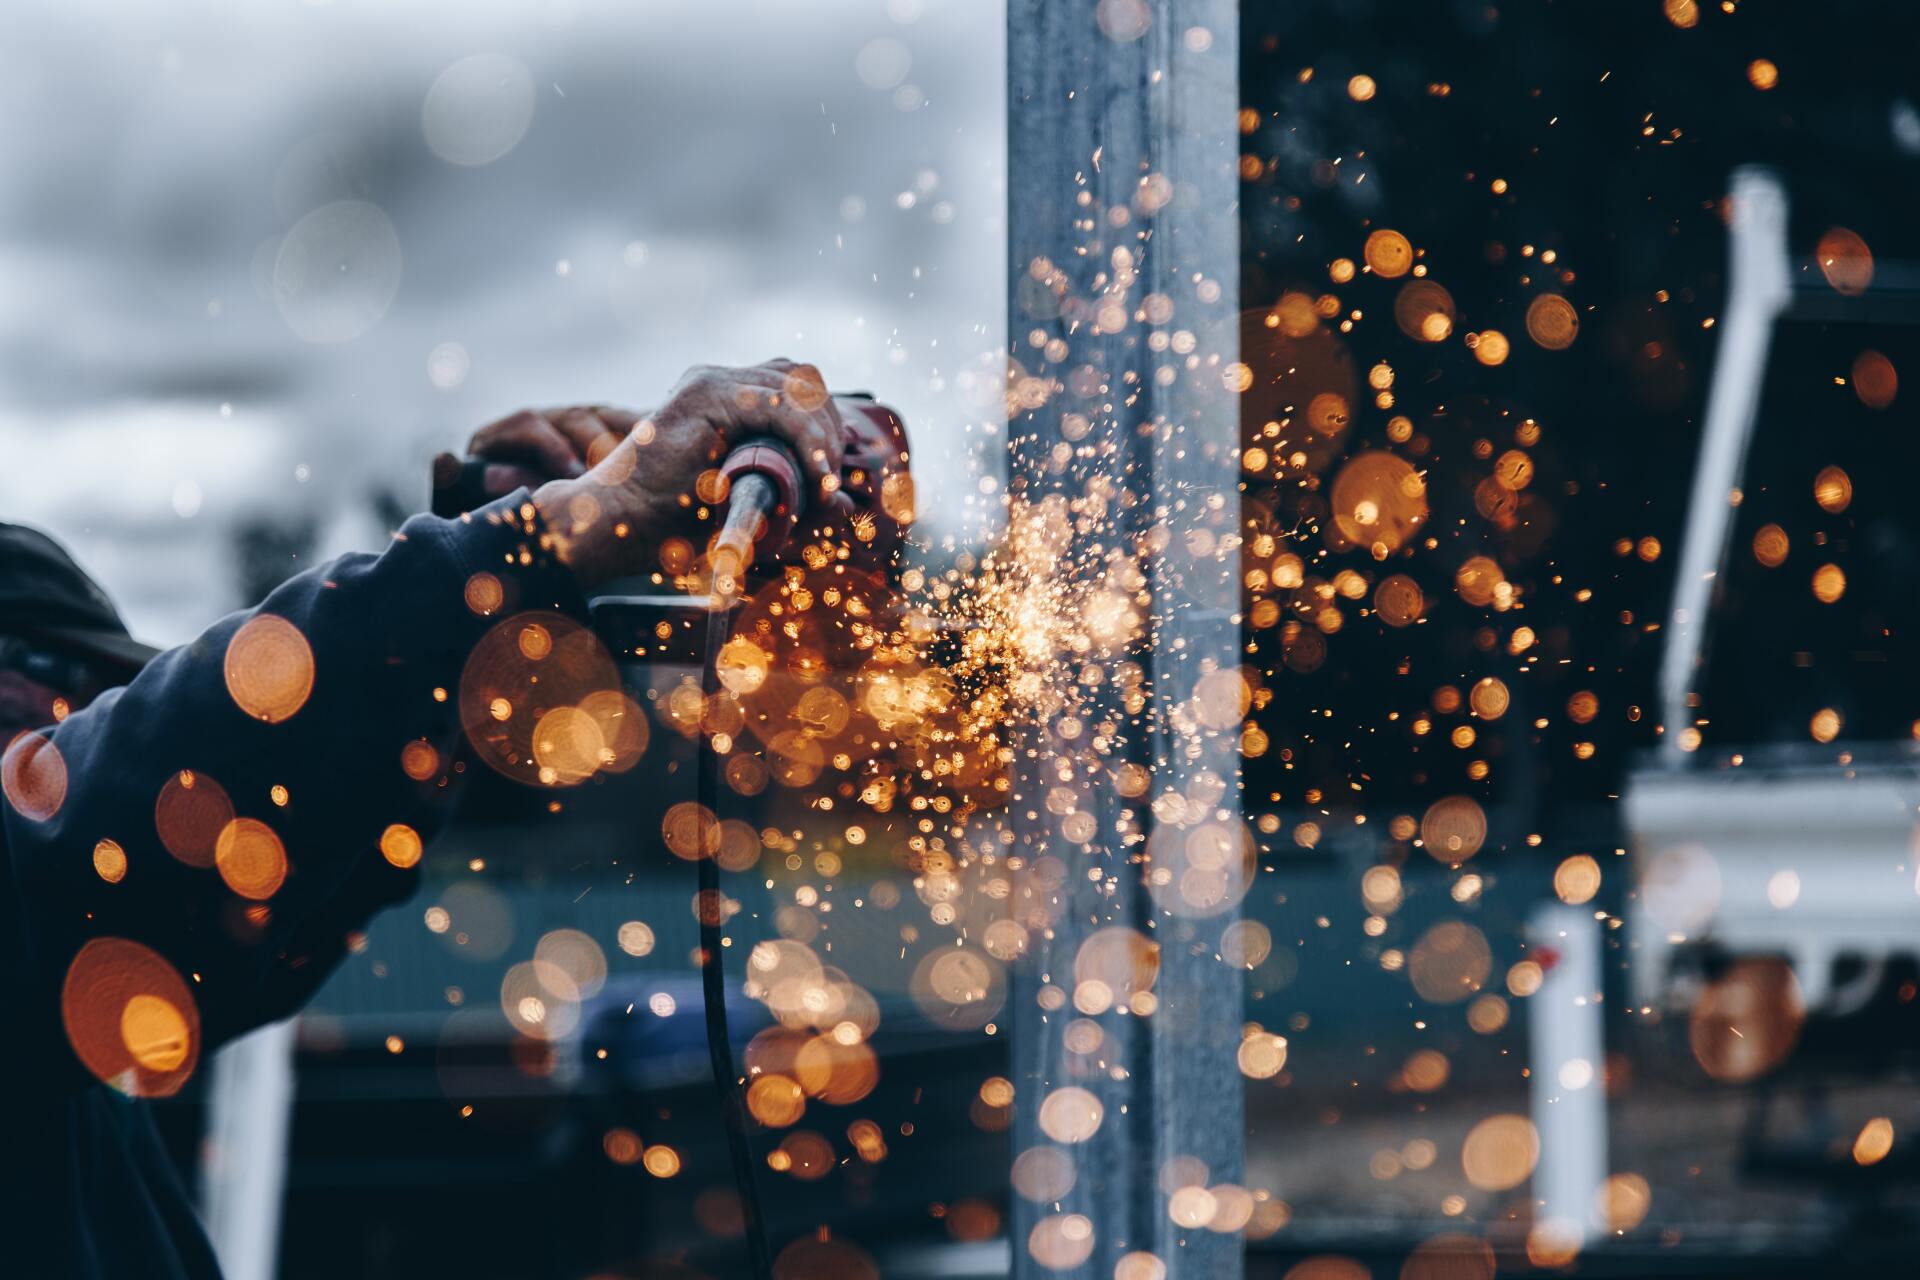 Artistic shot of a worker on a machine with sparks flying